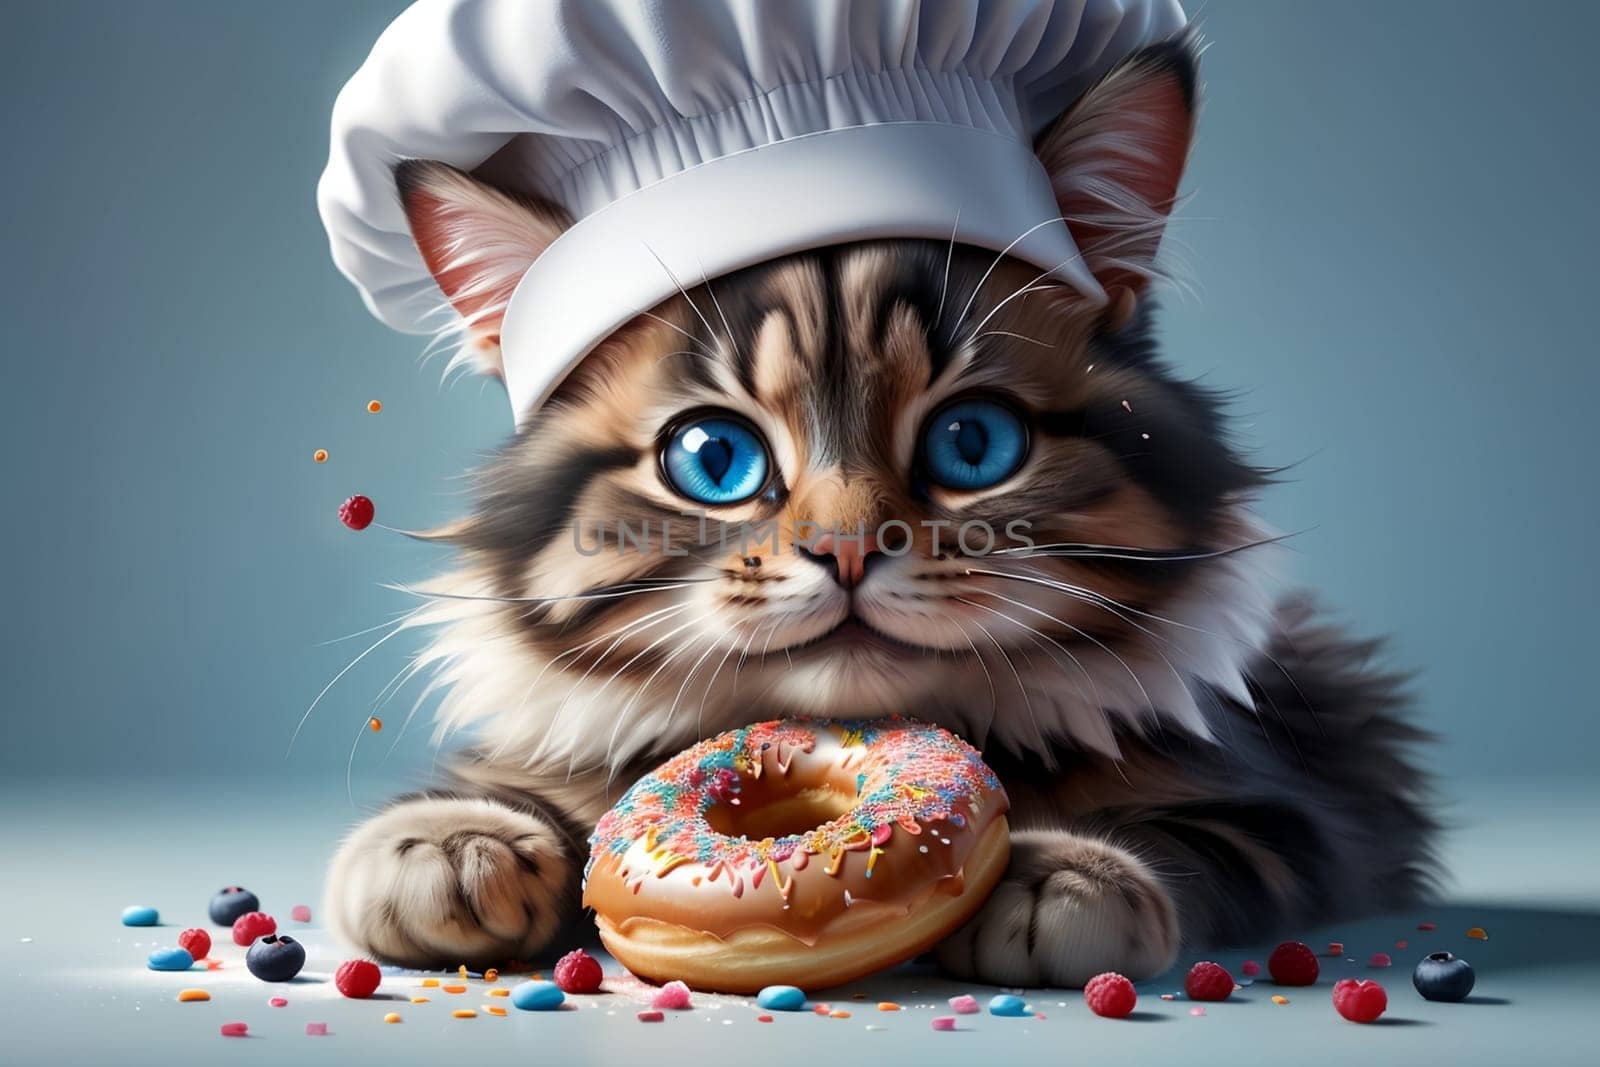 professional cat chef with colored sweet donuts, donuts in sweet glaze .